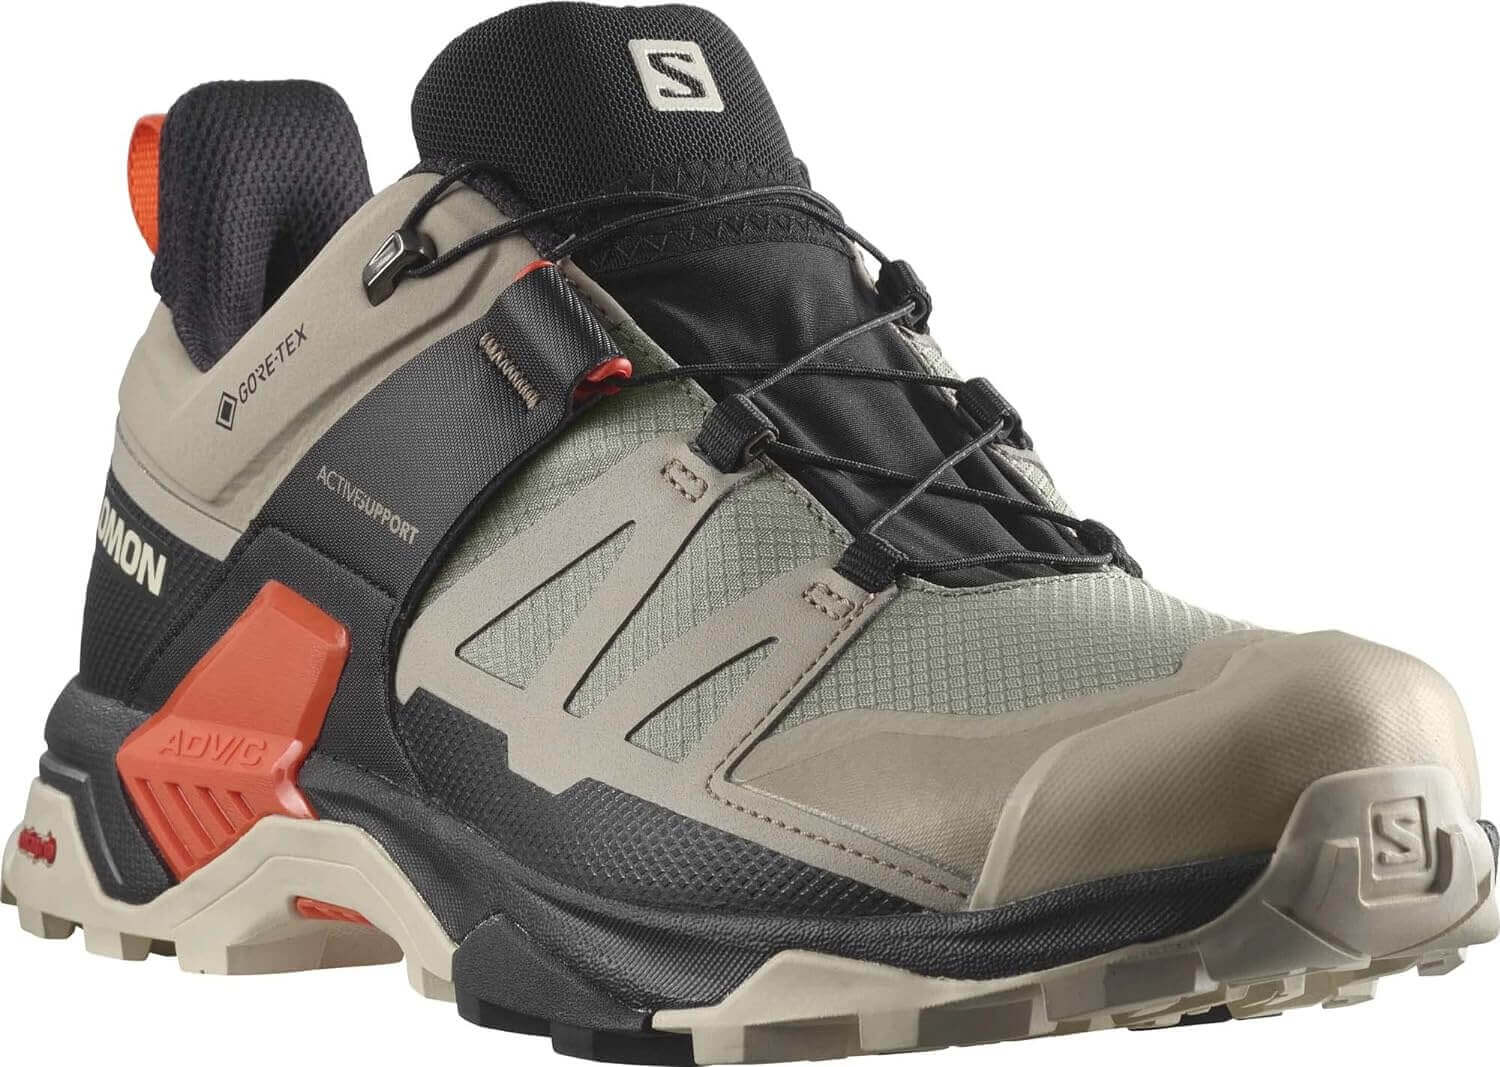 Shop The Latest >Salomon Men's X Ultra 4 GTX Hiking Shoes > *Only $224.00*> From The Top Brand > *Salomonl* > Shop Now and Get Free Shipping On Orders Over $45.00 >*Shop Earth Foot*